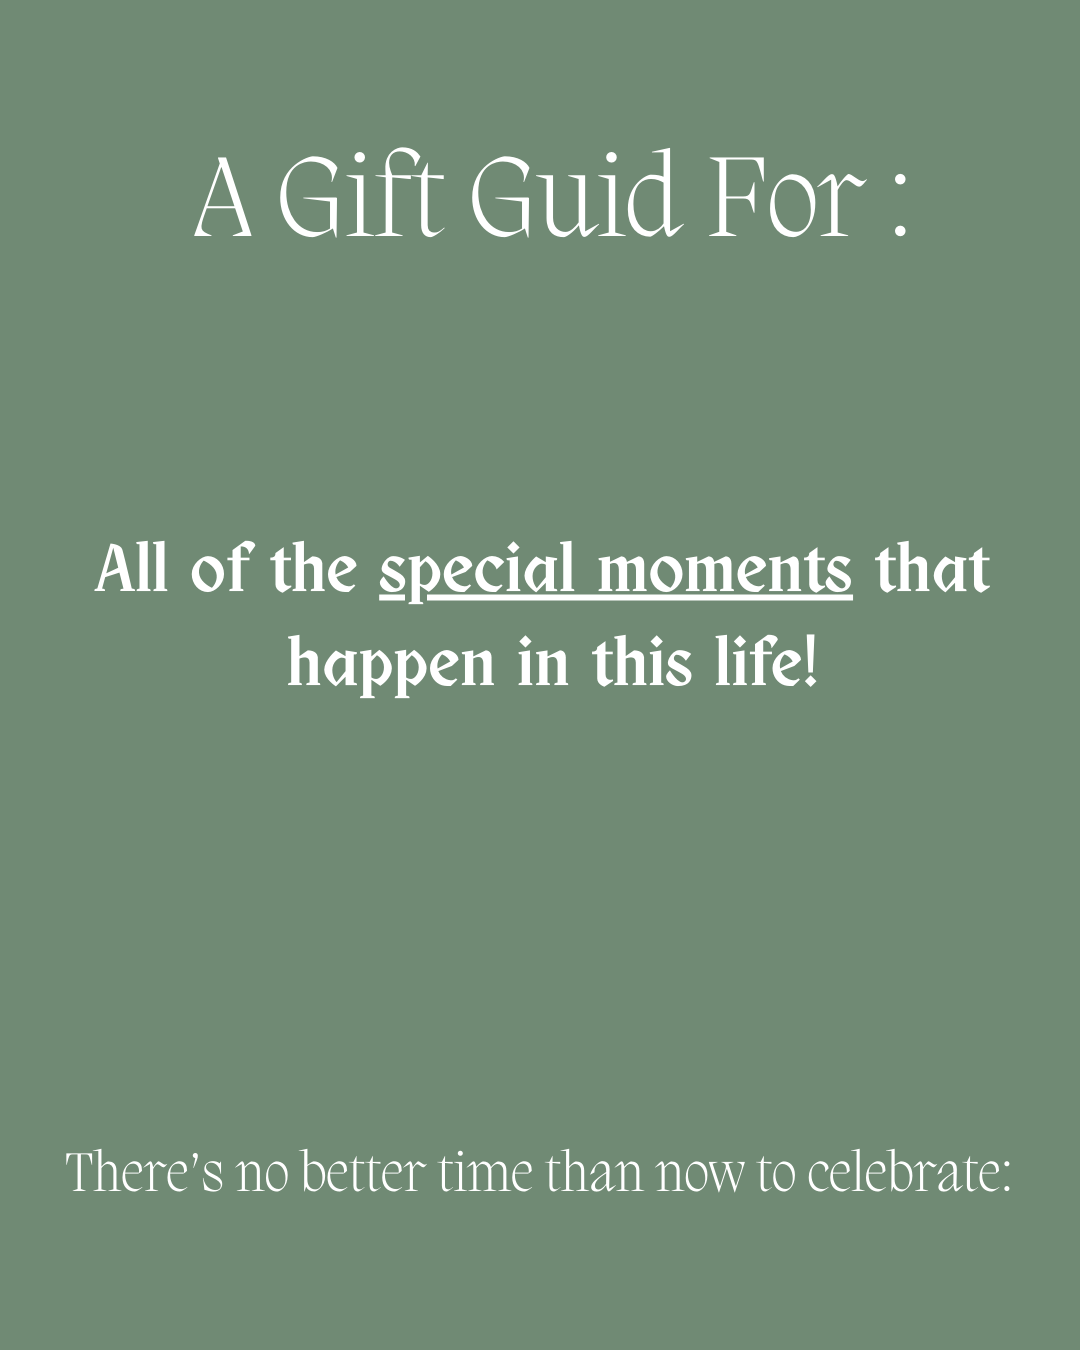 A Gift Guide for: A few of Life's Special Moments